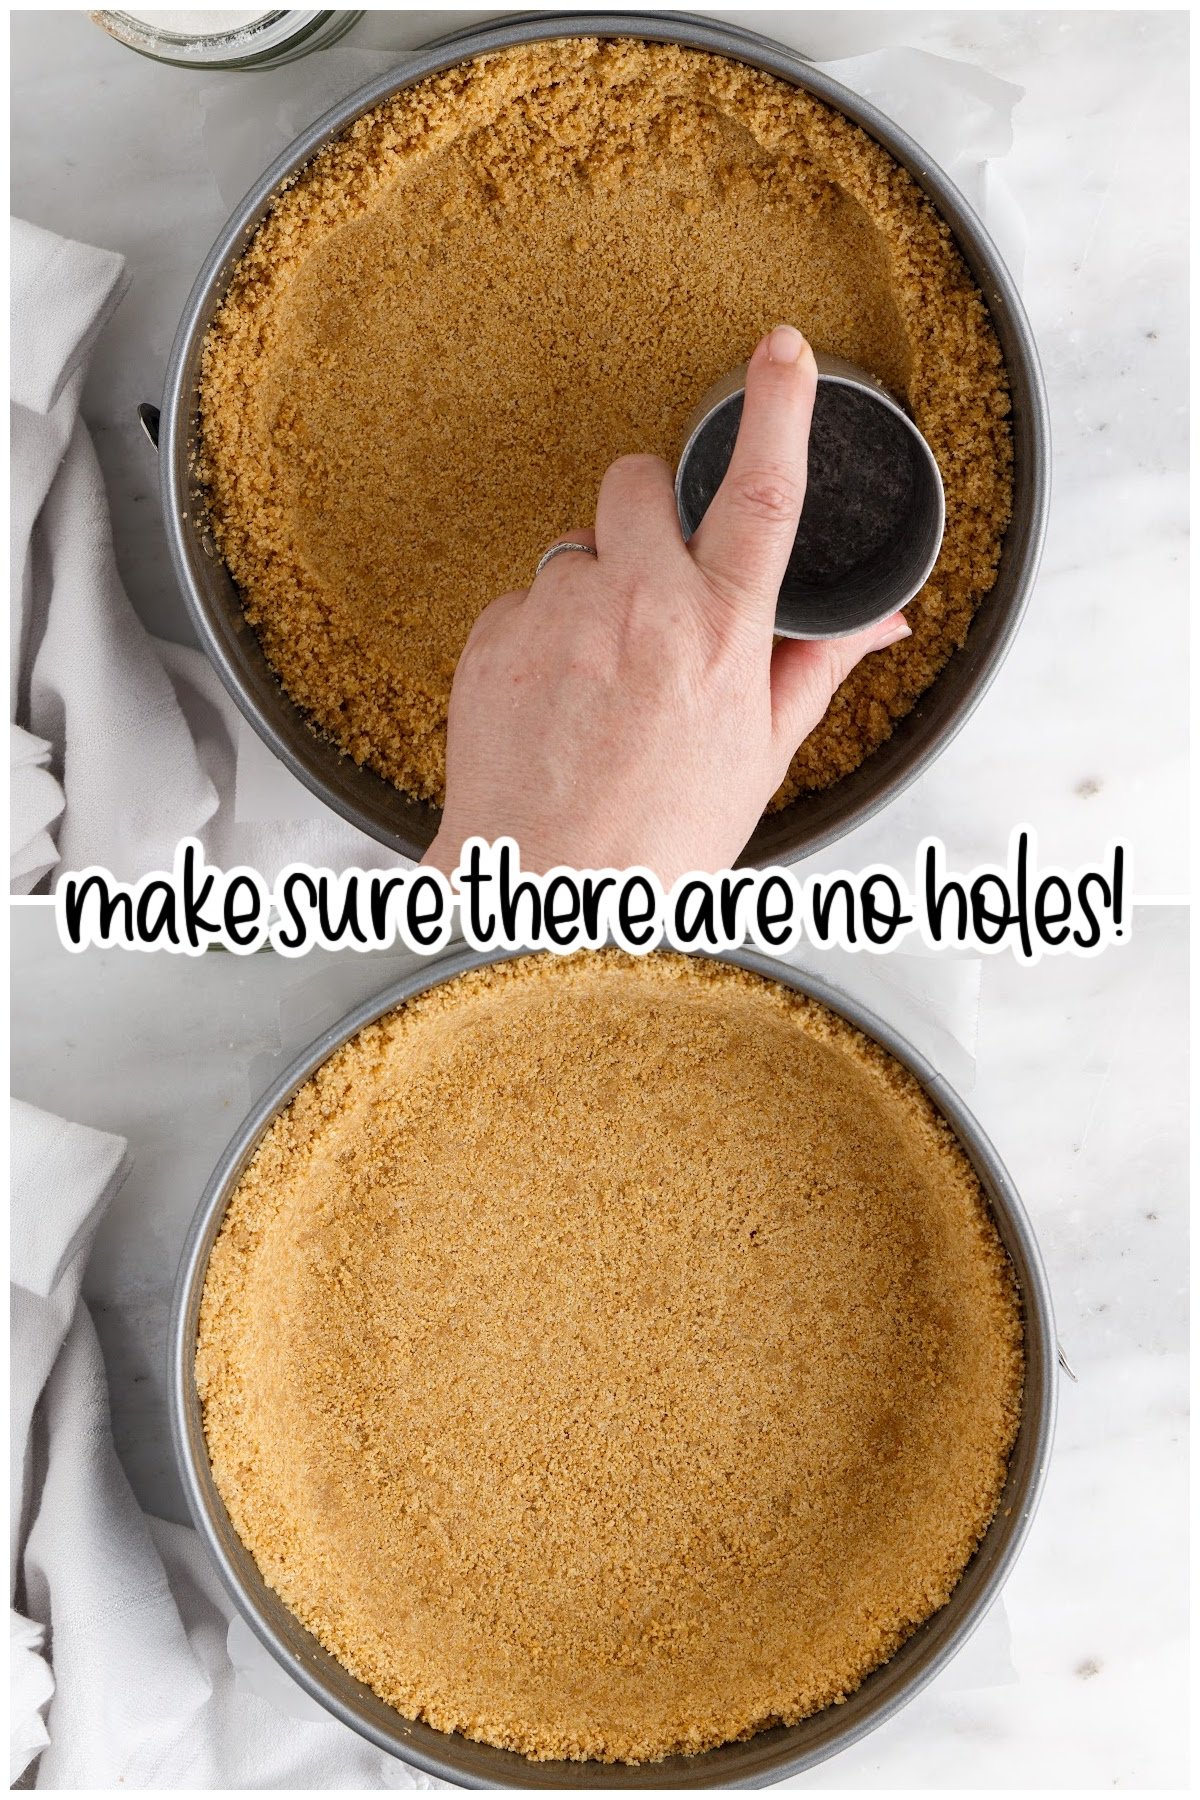 Pressing graham cracker crust into springform pan with the flat bottom of a measuring cup, with text overlay "make sure there are not holes."